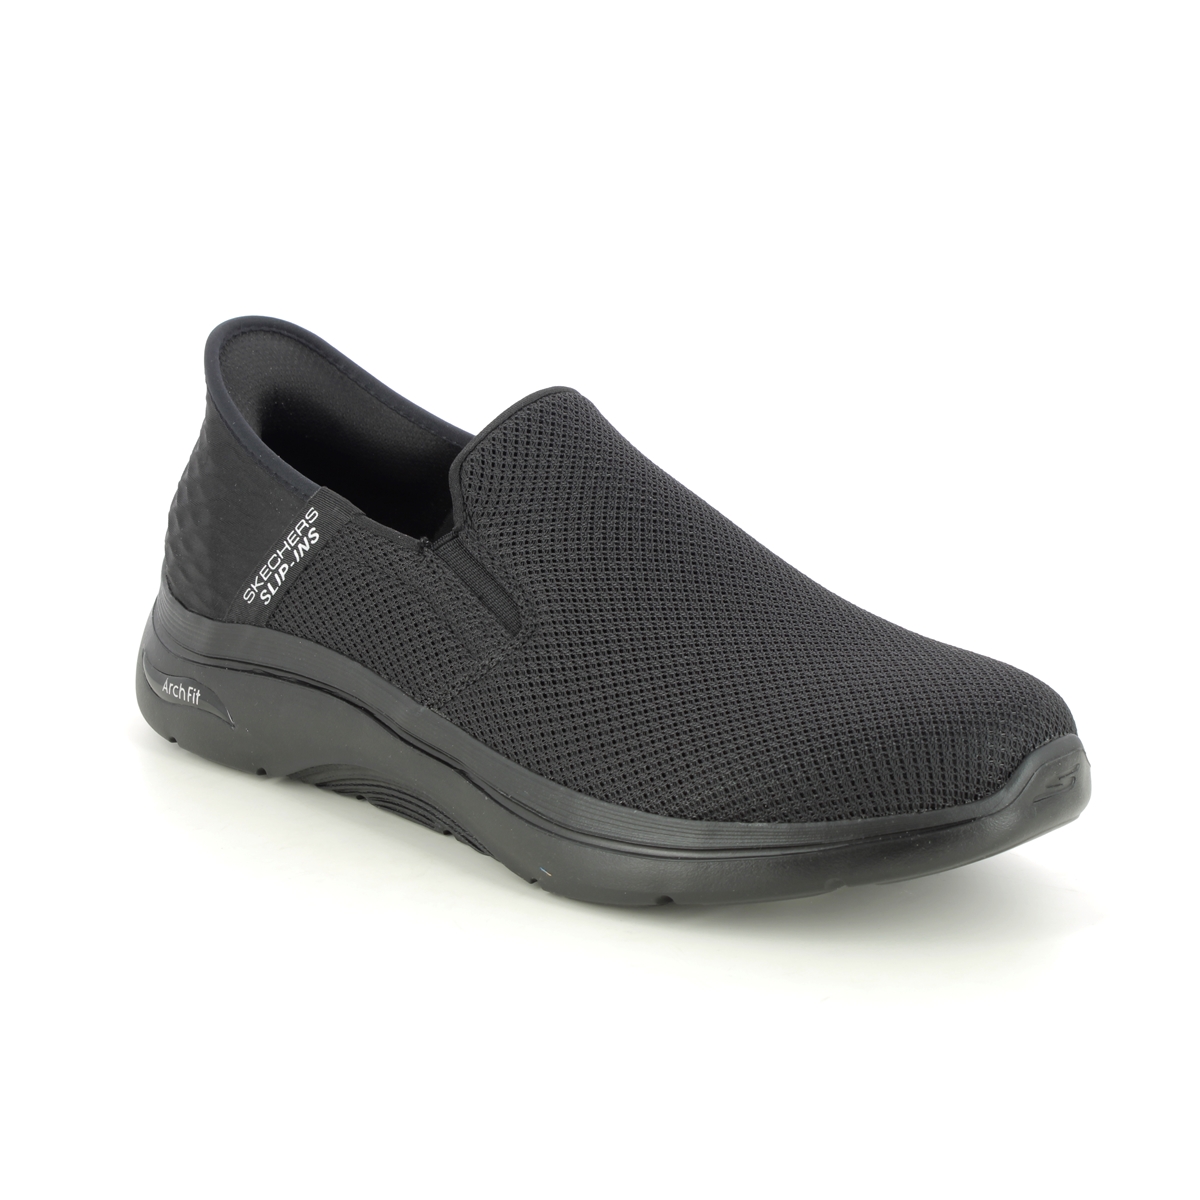 Skechers Slip Ins Arch 2 BBK Black Mens trainers 216600 in a Plain Textile in Size 8.5